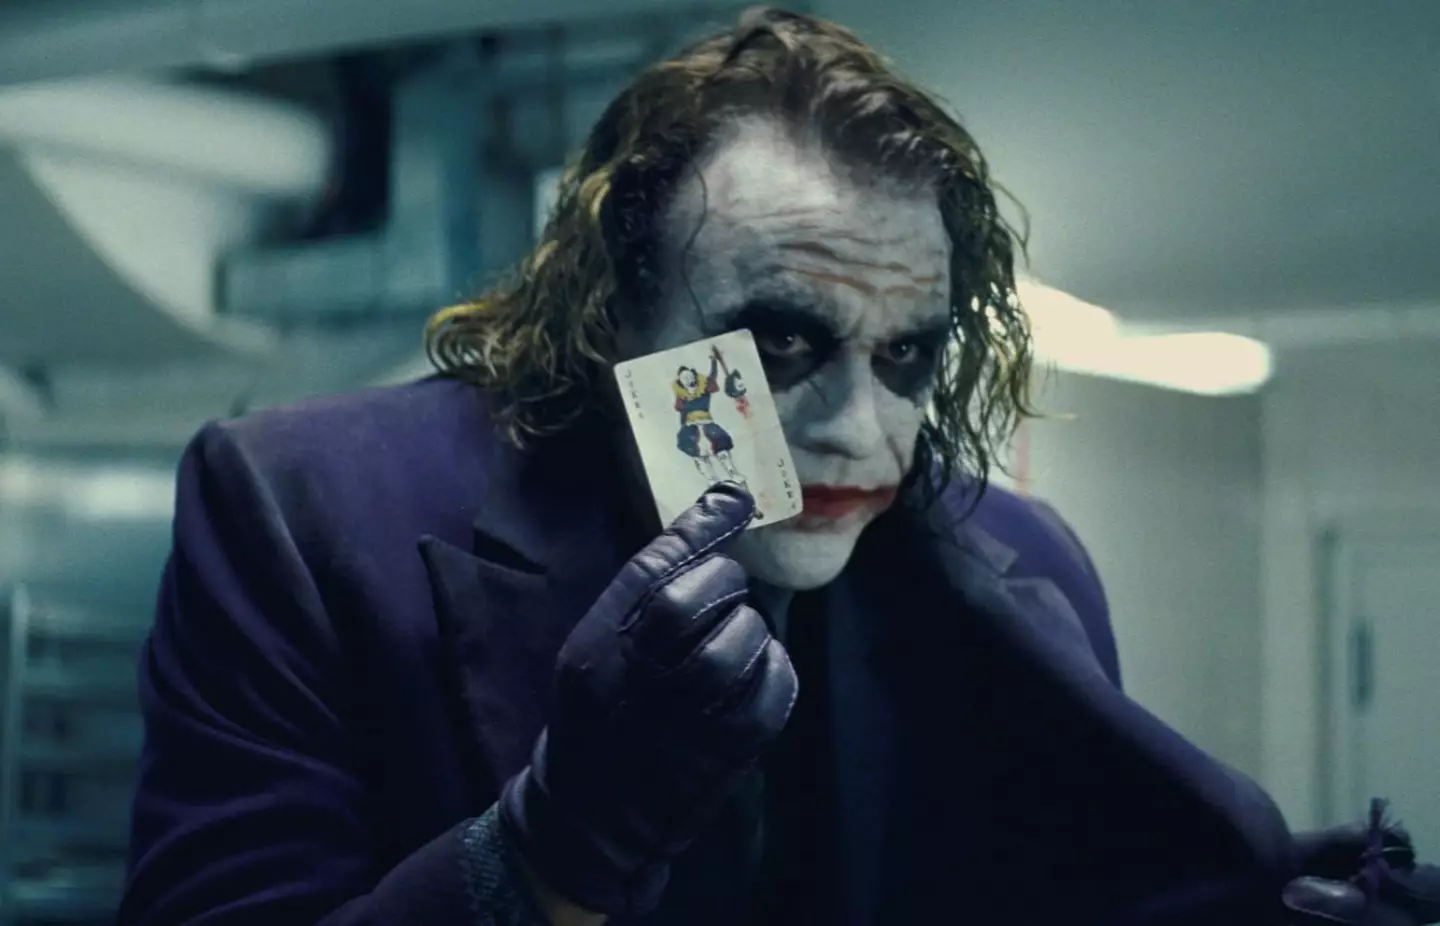 Christopher Nolan’s Dark Knight is widely considered one of the greatest superhero films ever.